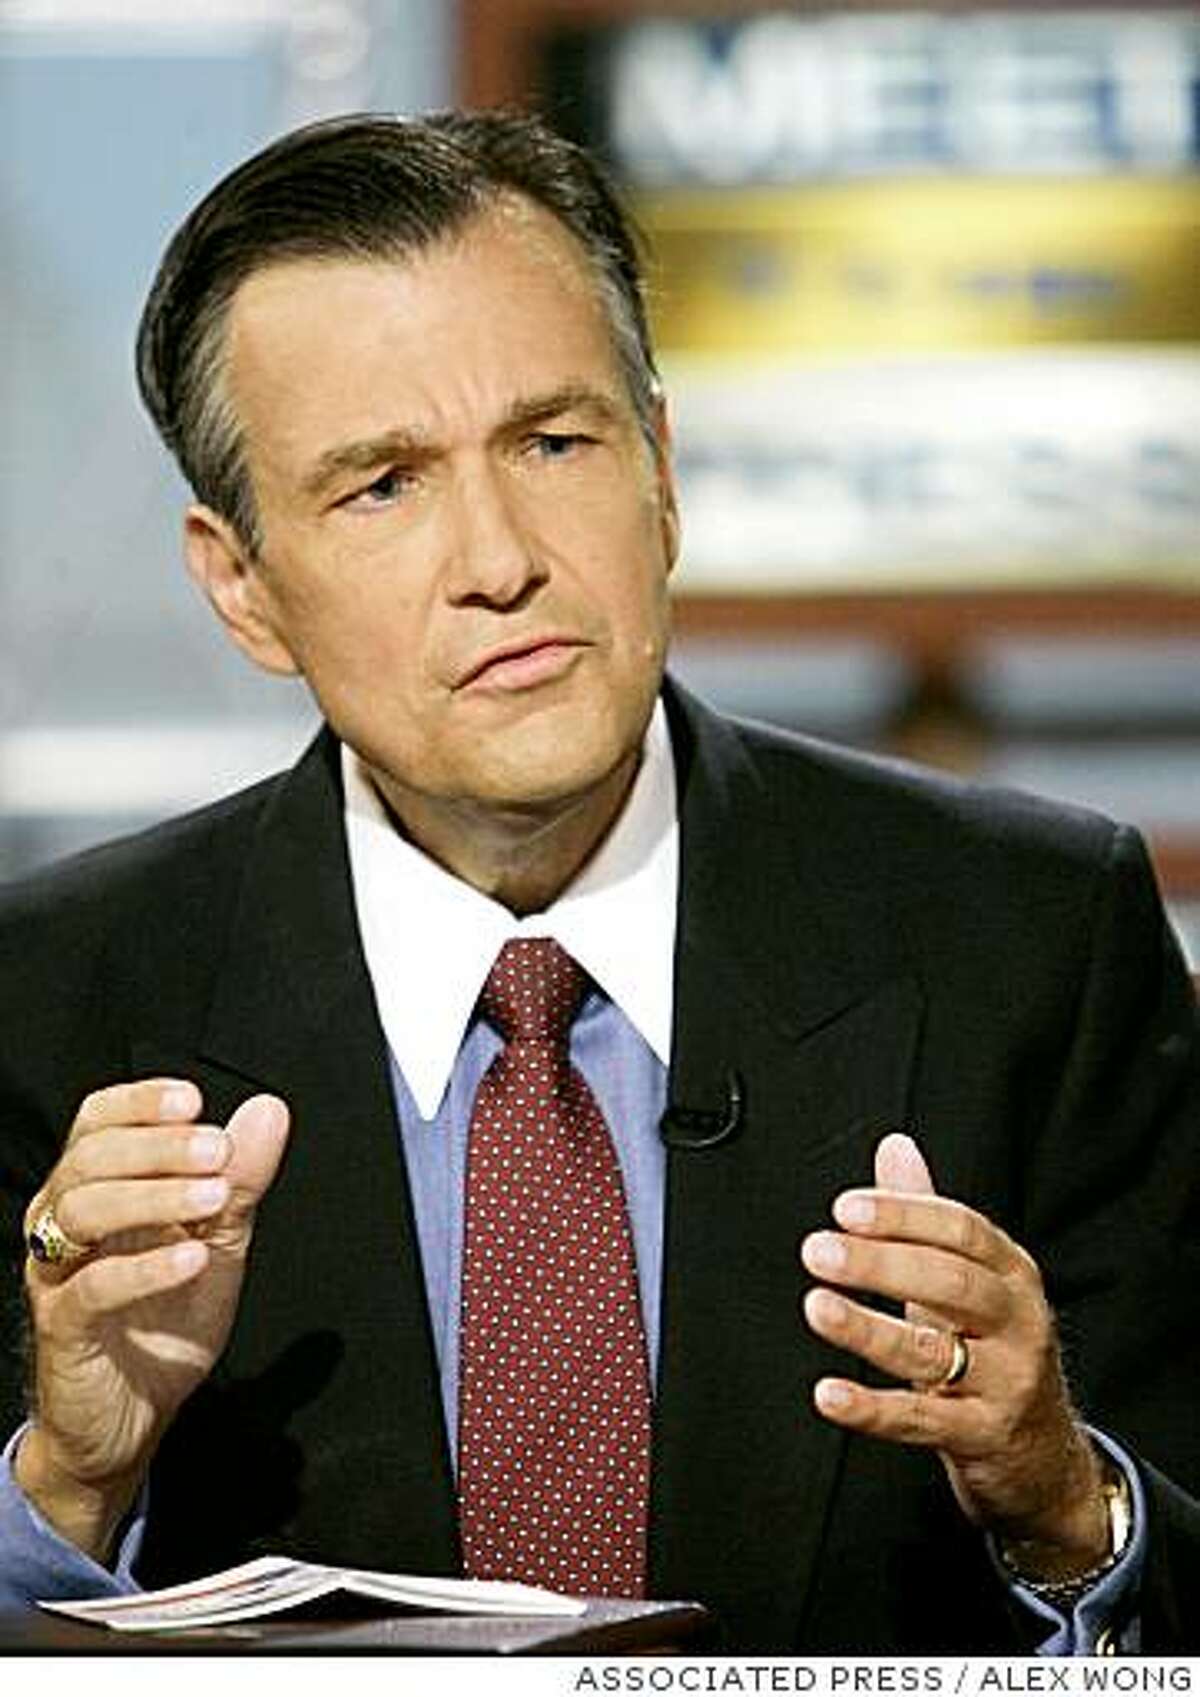 In this photograph provided by 'Meet the Press', professor Douglas Kmiec of Pepperdine University, appears during the taping of 'Meet the Press' Sunday, Aug. 7, 2005 at the NBC studios in Washington. (AP Photo/Meet The Press/Alex Wong)